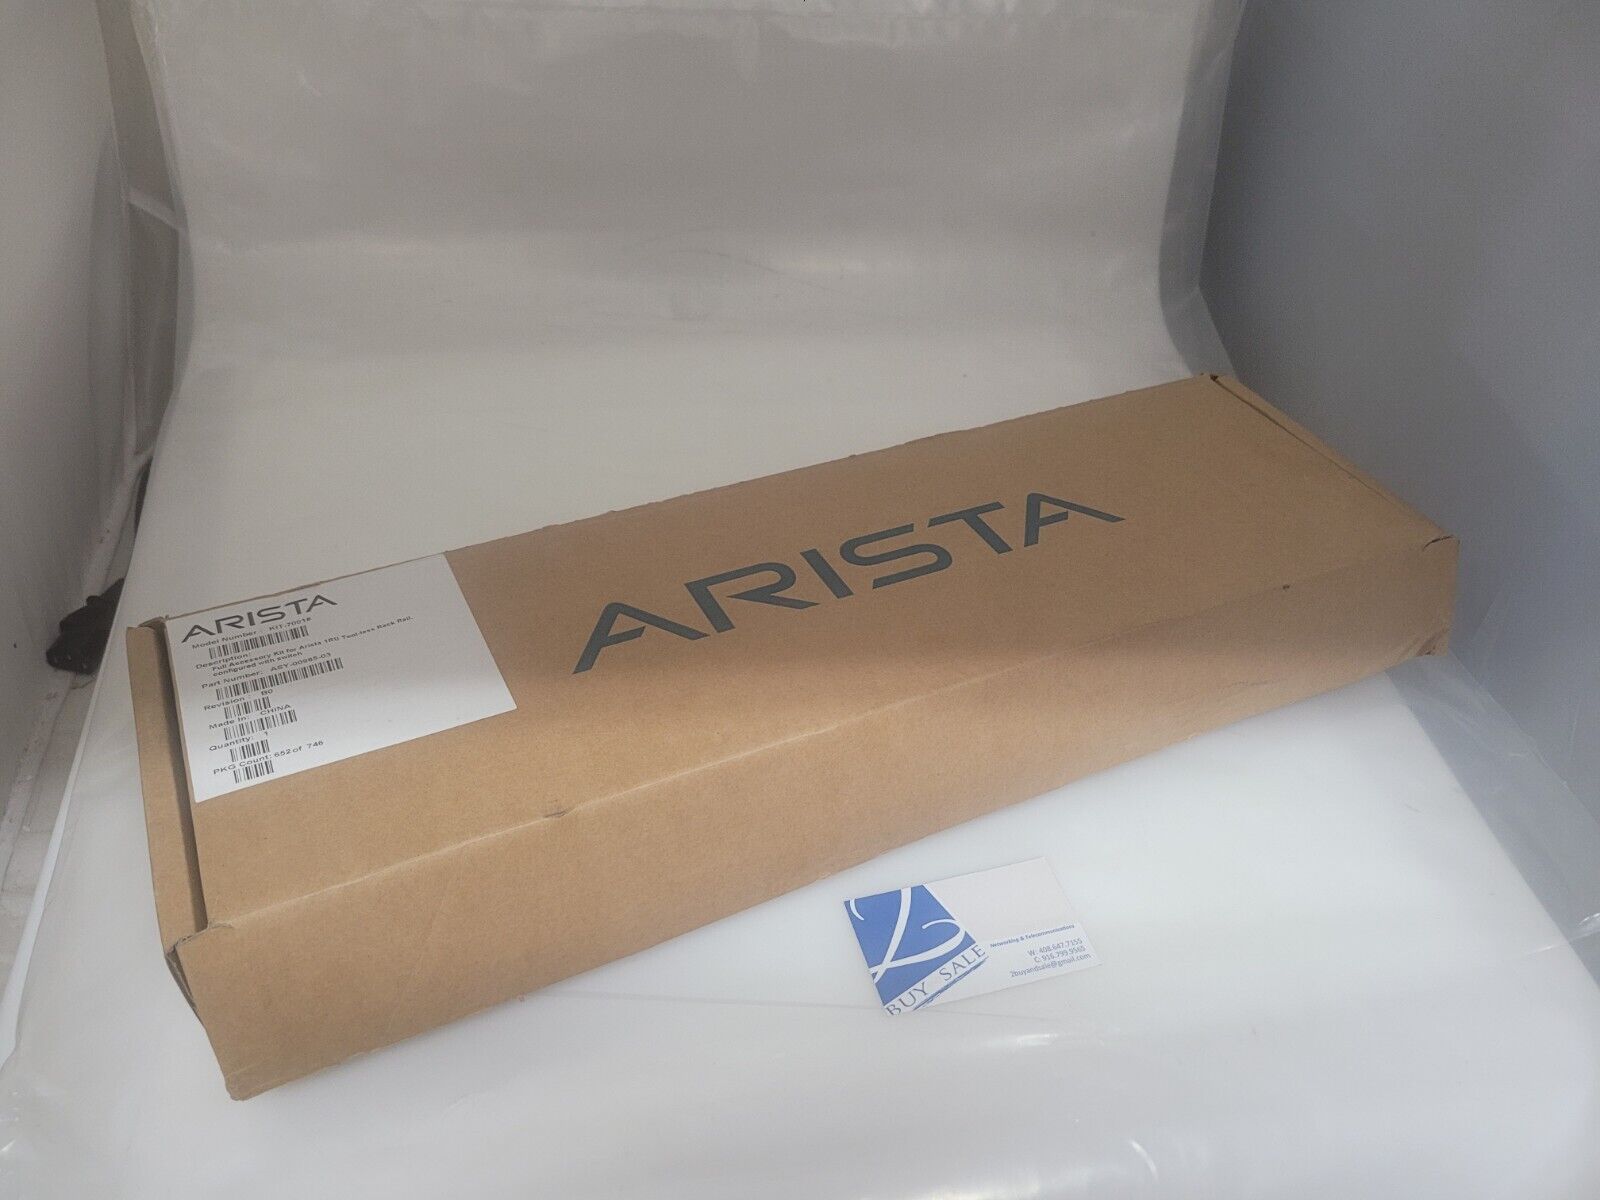 Arista ASY-00985-03 Rail Full Accessory Kit for Arista 1RU switches